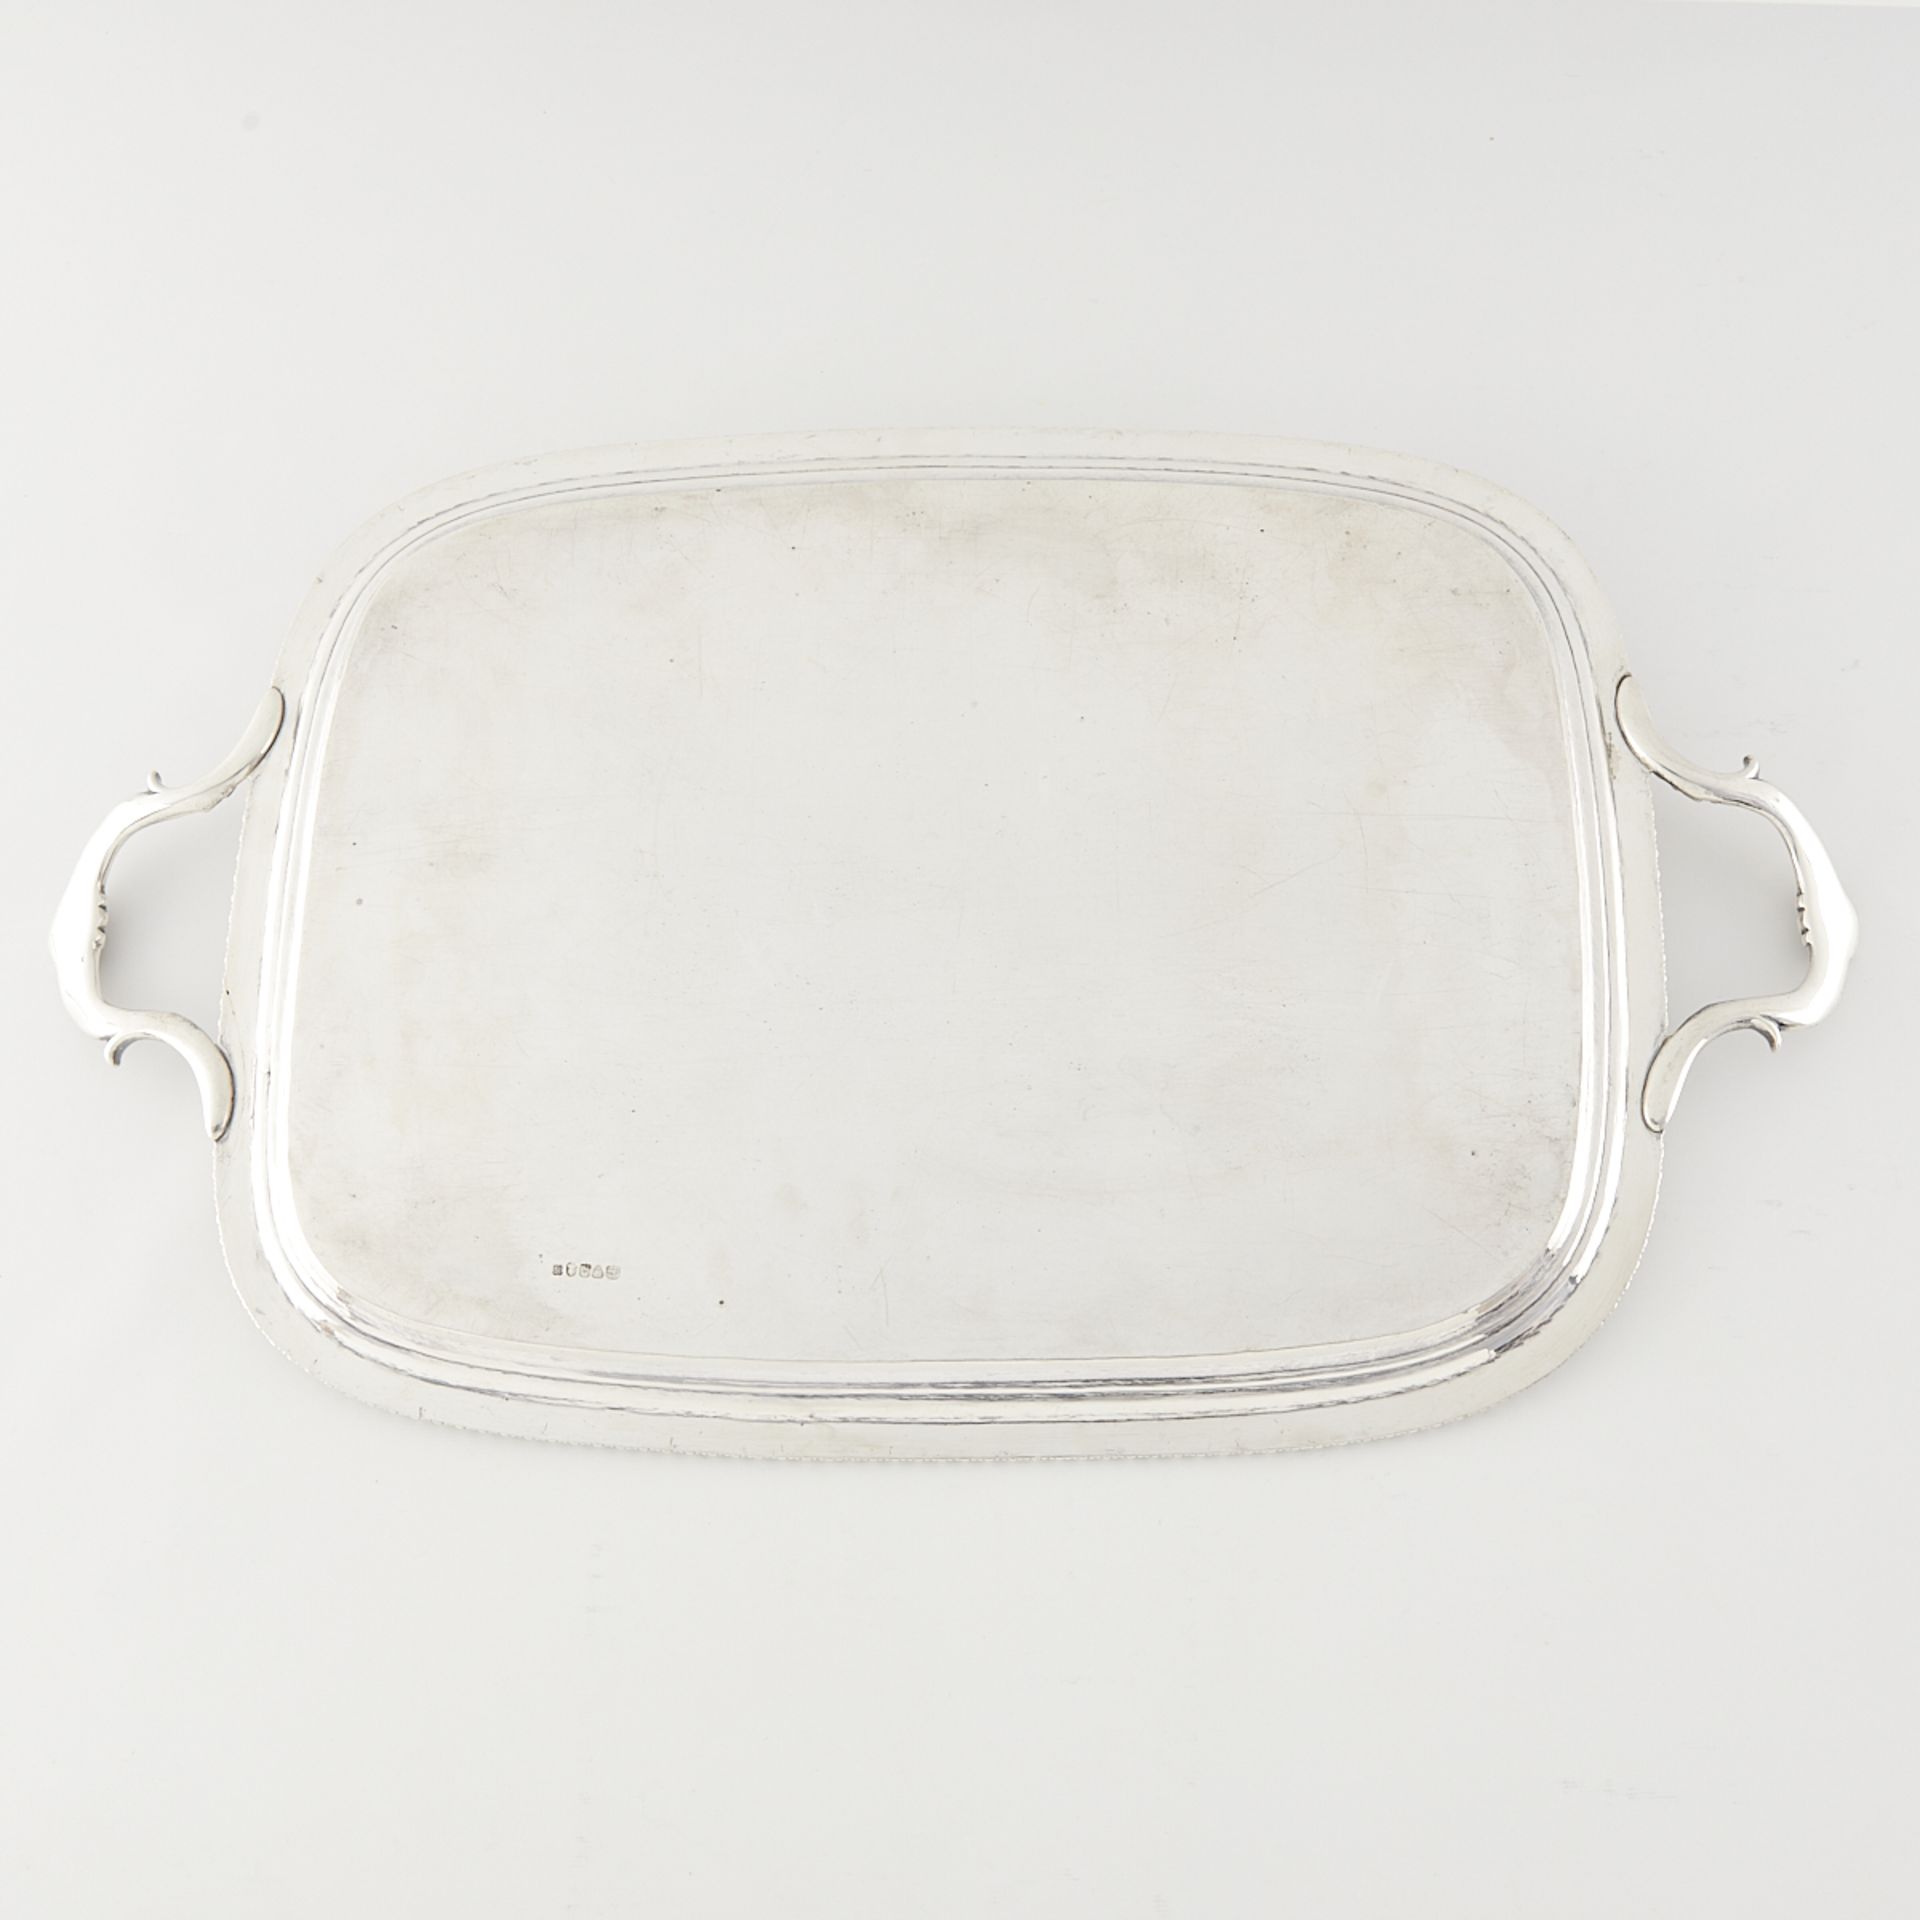 Smith & Hayter Sterling Silver Tray 1825 - Image 4 of 6